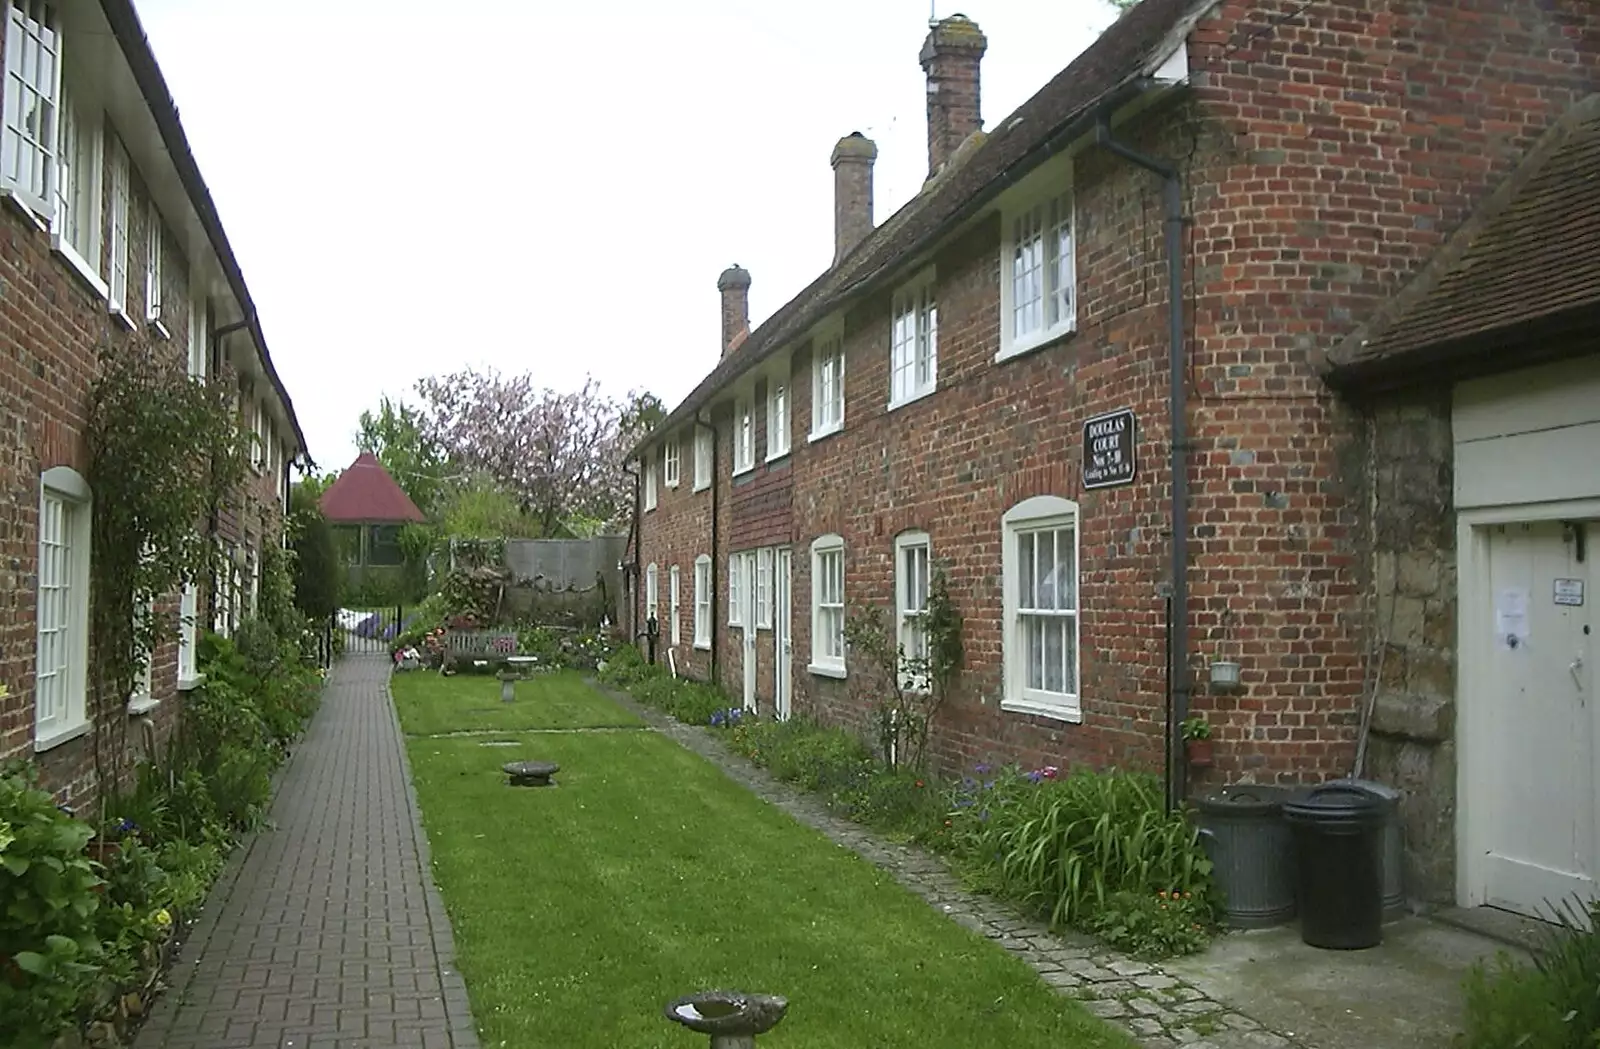 A nice little row of cottages, from The BSCC Annual Bike Ride, Lenham, Kent - 8th May 2004